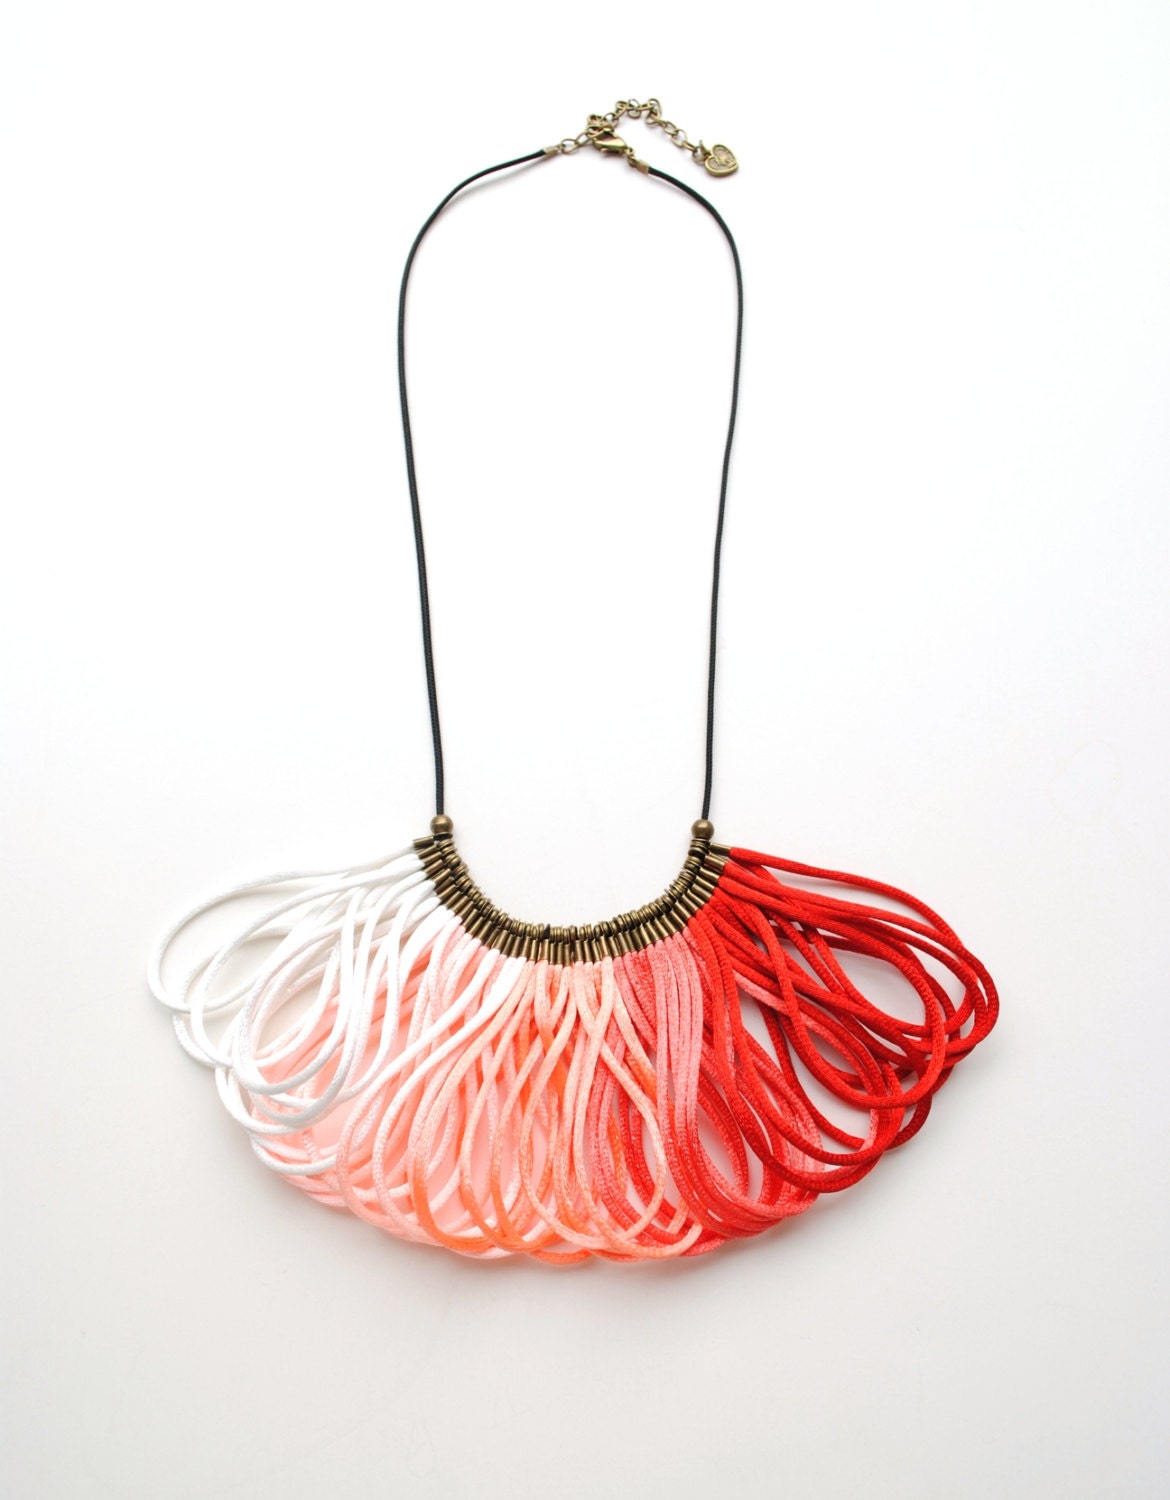 Ombre Red White Coral Peach Salmon Satin Cord, Rope Jewelry, Statement Necklace, Bib, Elegant, Silk, Gift for Her